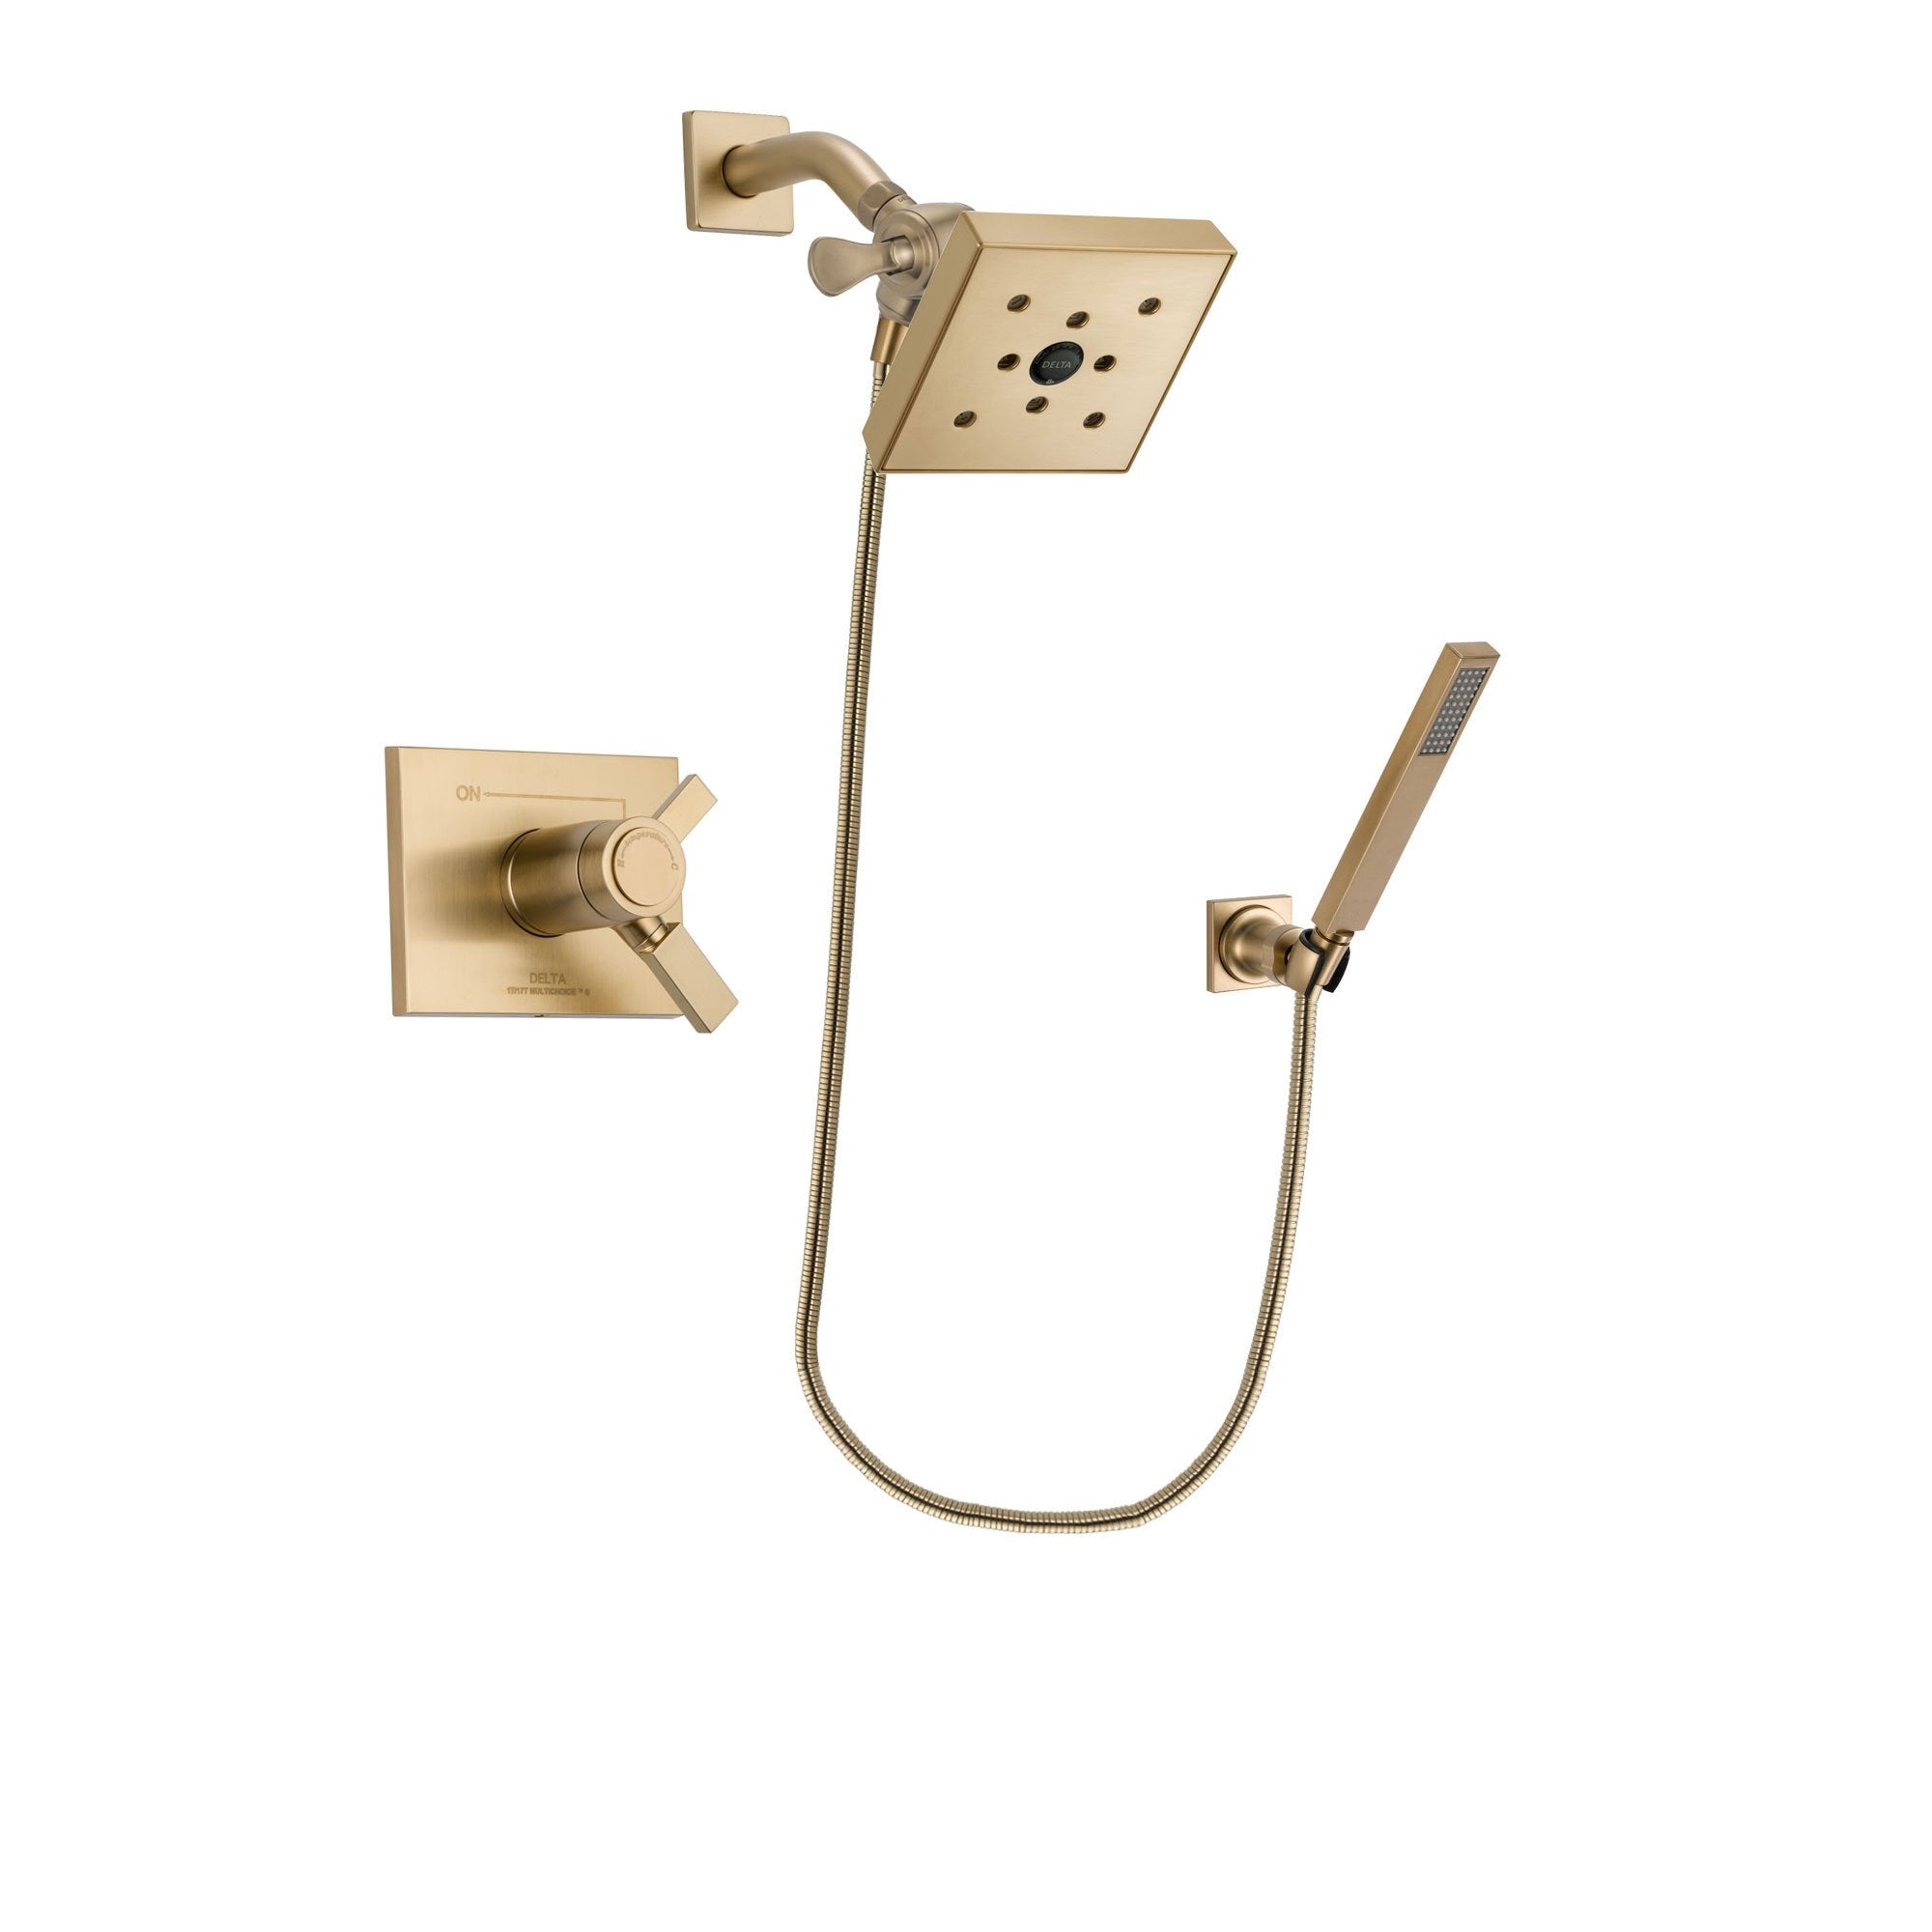 Delta Vero Champagne Bronze Finish Thermostatic Shower Faucet System Package with Square Shower Head and Modern Wall-Mount Handheld Shower Stick Includes Rough-in Valve DSP3900V